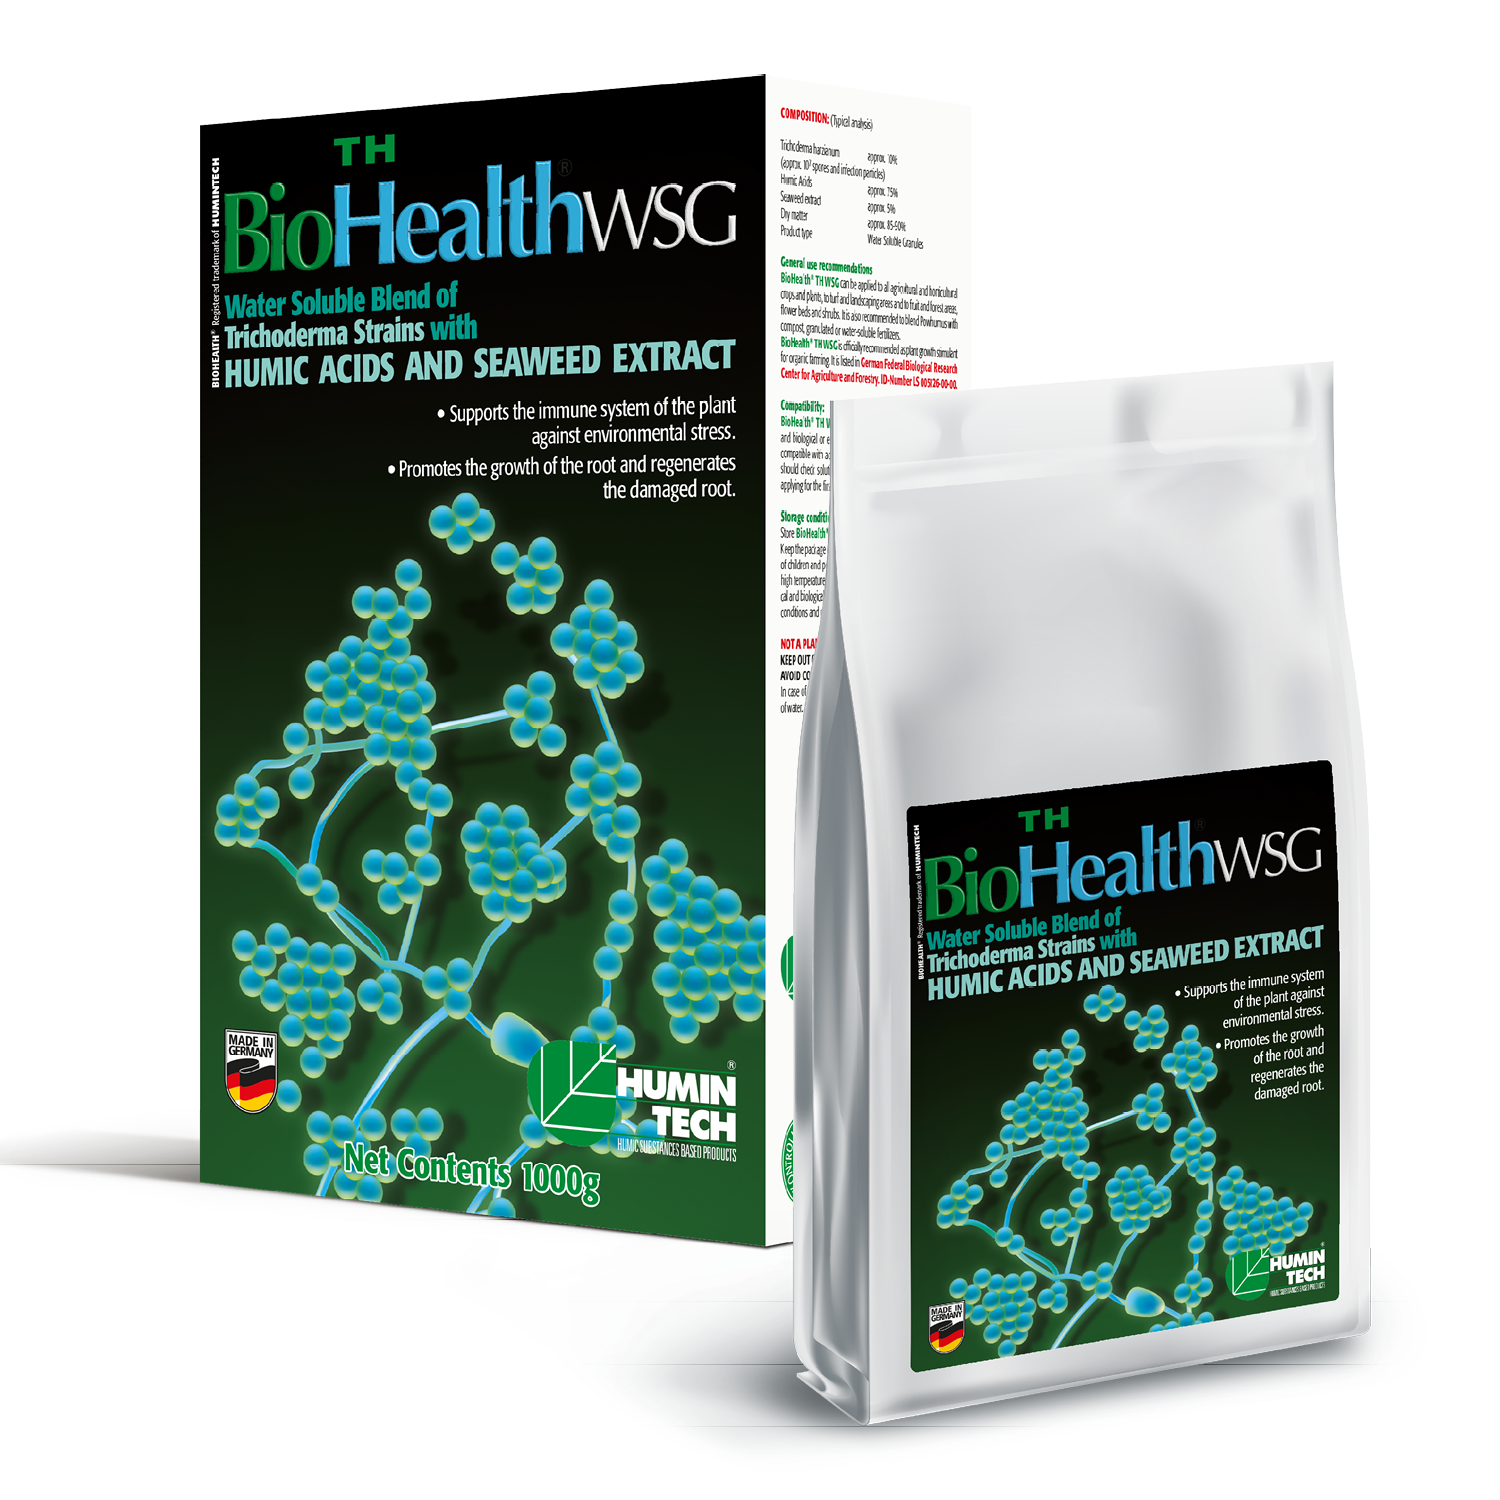 BioHealth TH WSG Water Soluble Blend of Trichoderma strains Humic Acids and Seaweed Extract